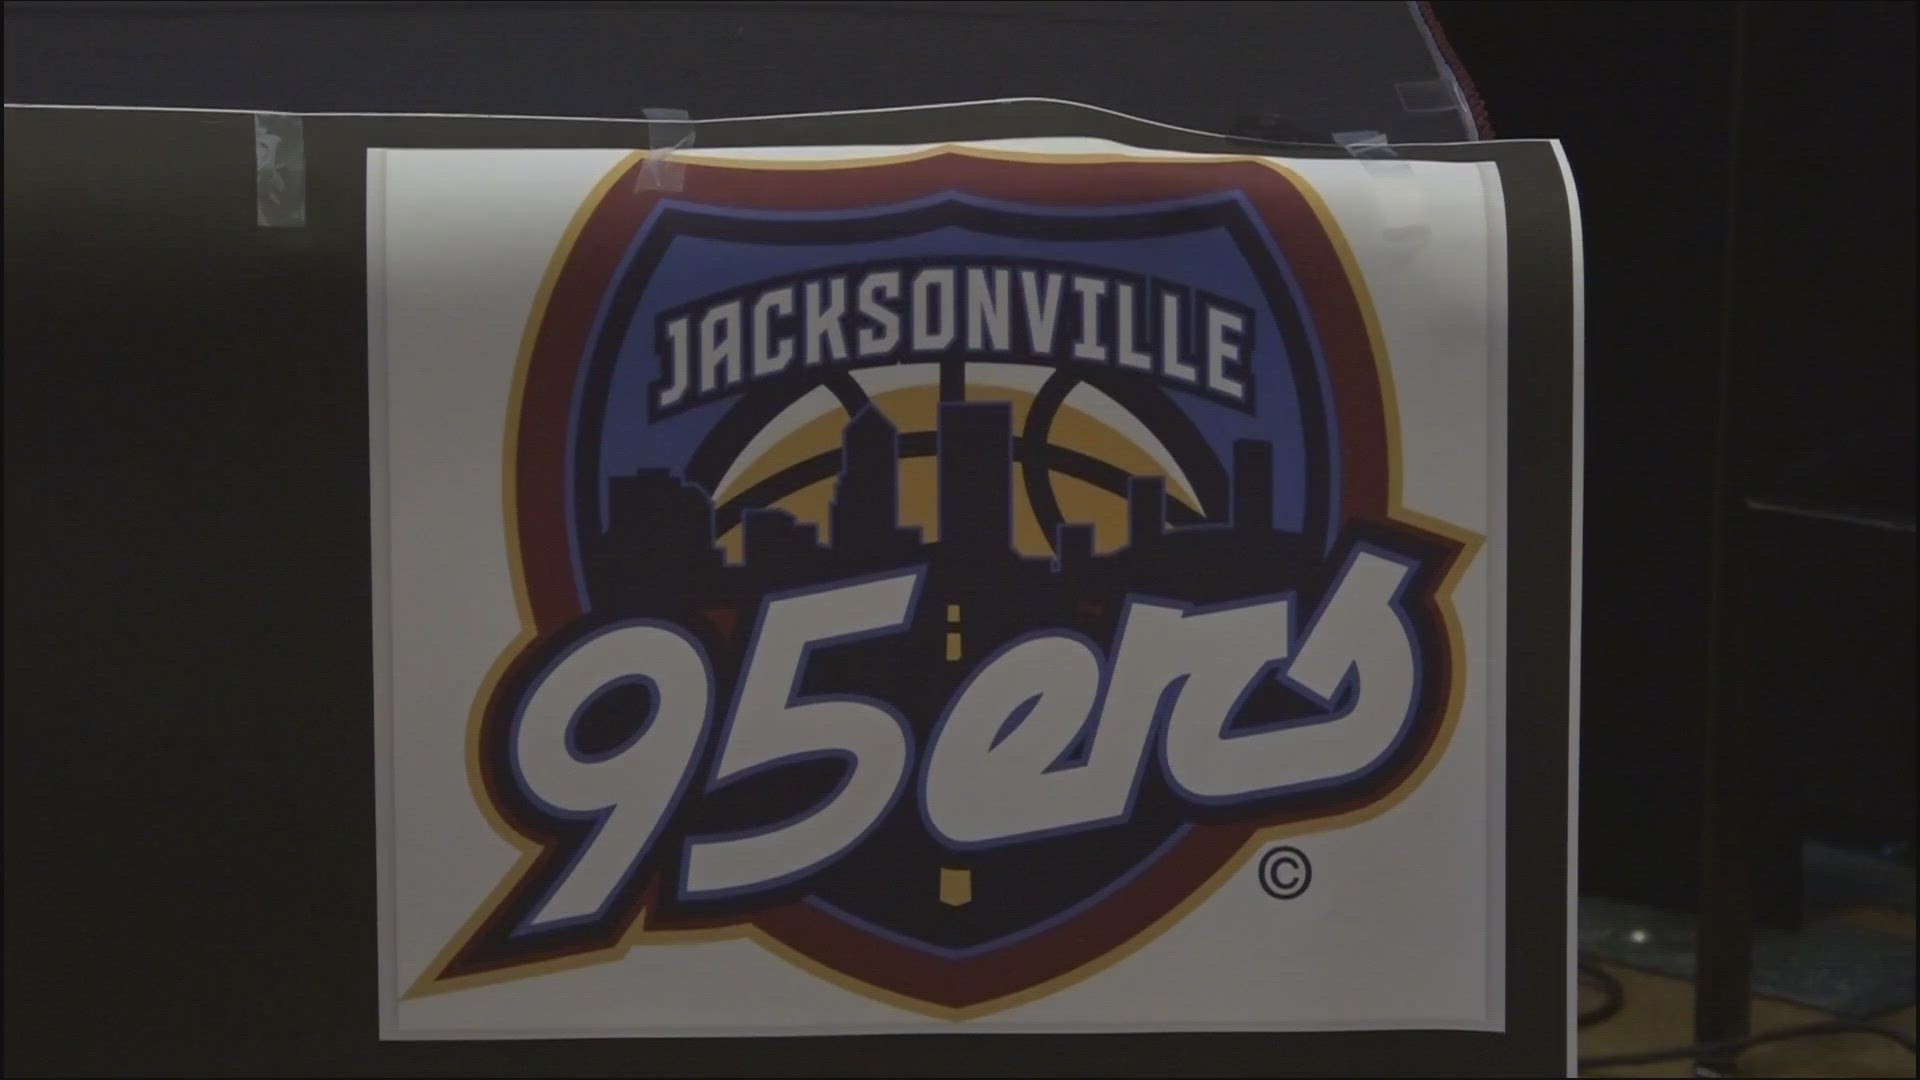 The 95ers, Jacksonville's newest semi-professional basketball team, will hit the floor in March of 2024. They'll compete in The Basketball League.